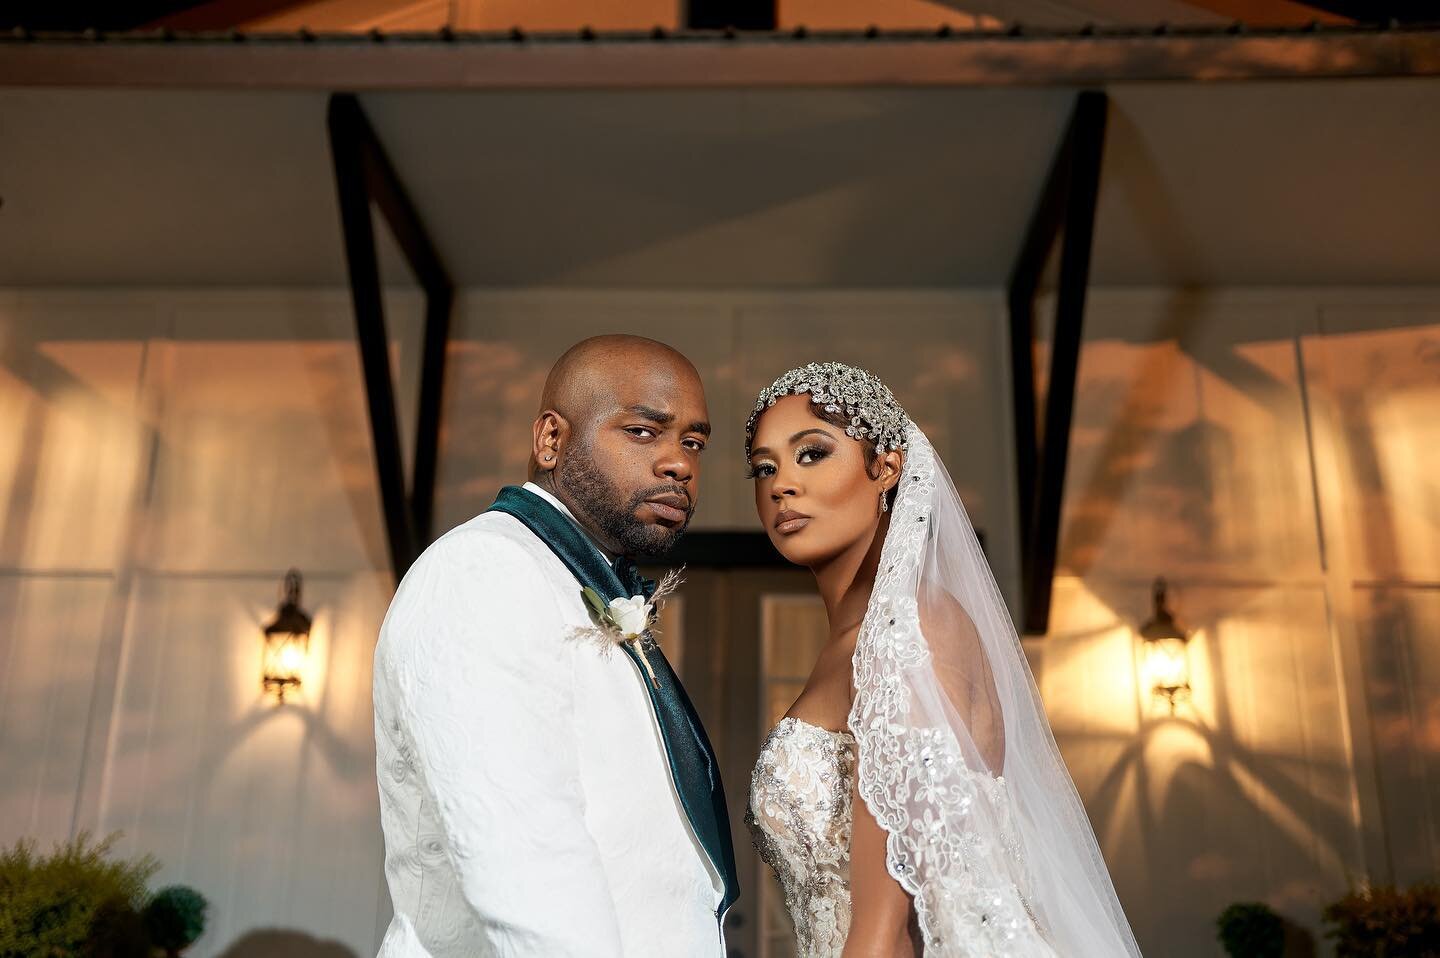 Caliah &amp; Andre kicked May off with a bang! Their wedding was absolutely beautiful from their vows to the turn up at the end!
.
.
.
Planner: Sue Bailey 
Florist: @reborne_design_decor
MUA: @facedatbeauty
Hairstylist: @darrenae_hartman
Event space: